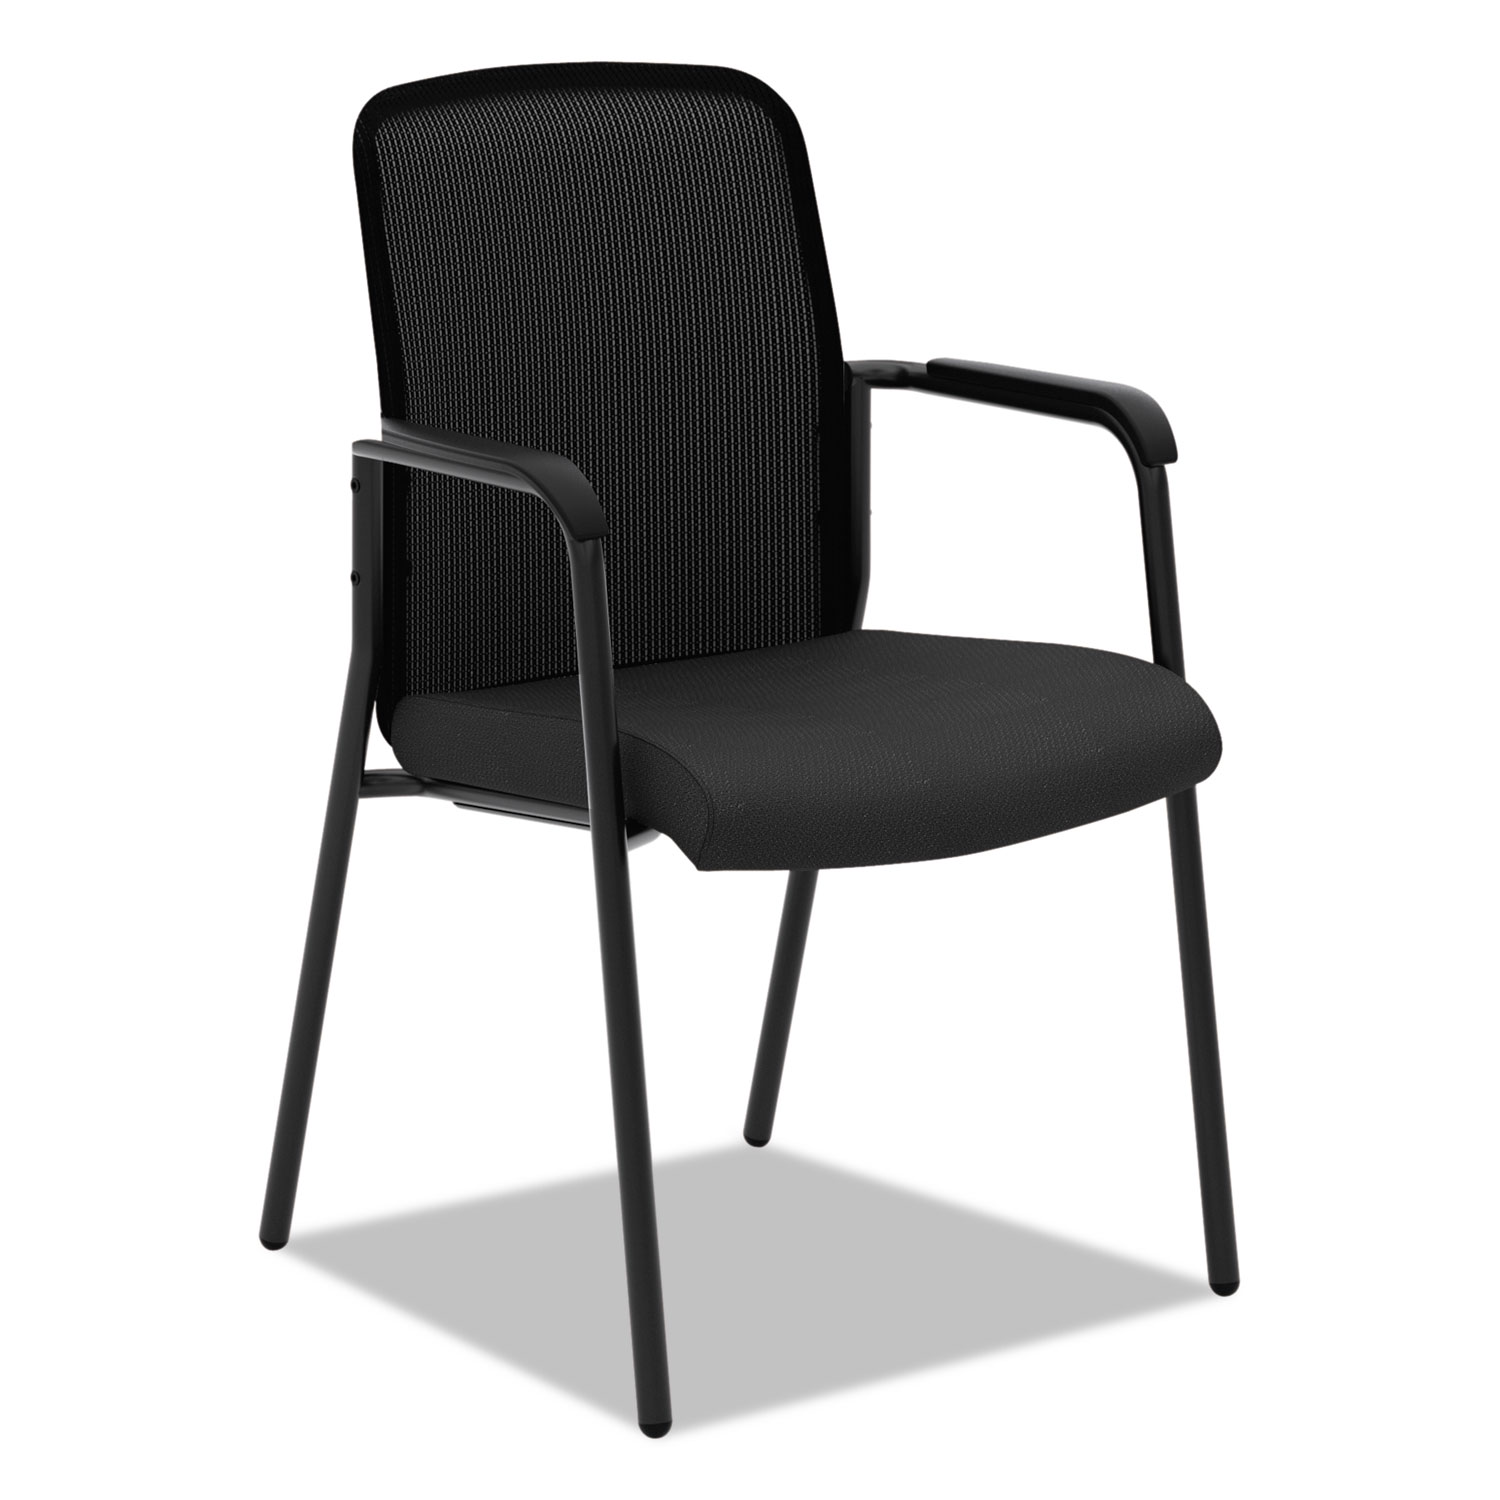 VL518 Mesh Back Multi-Purpose Chair with Arms, Black